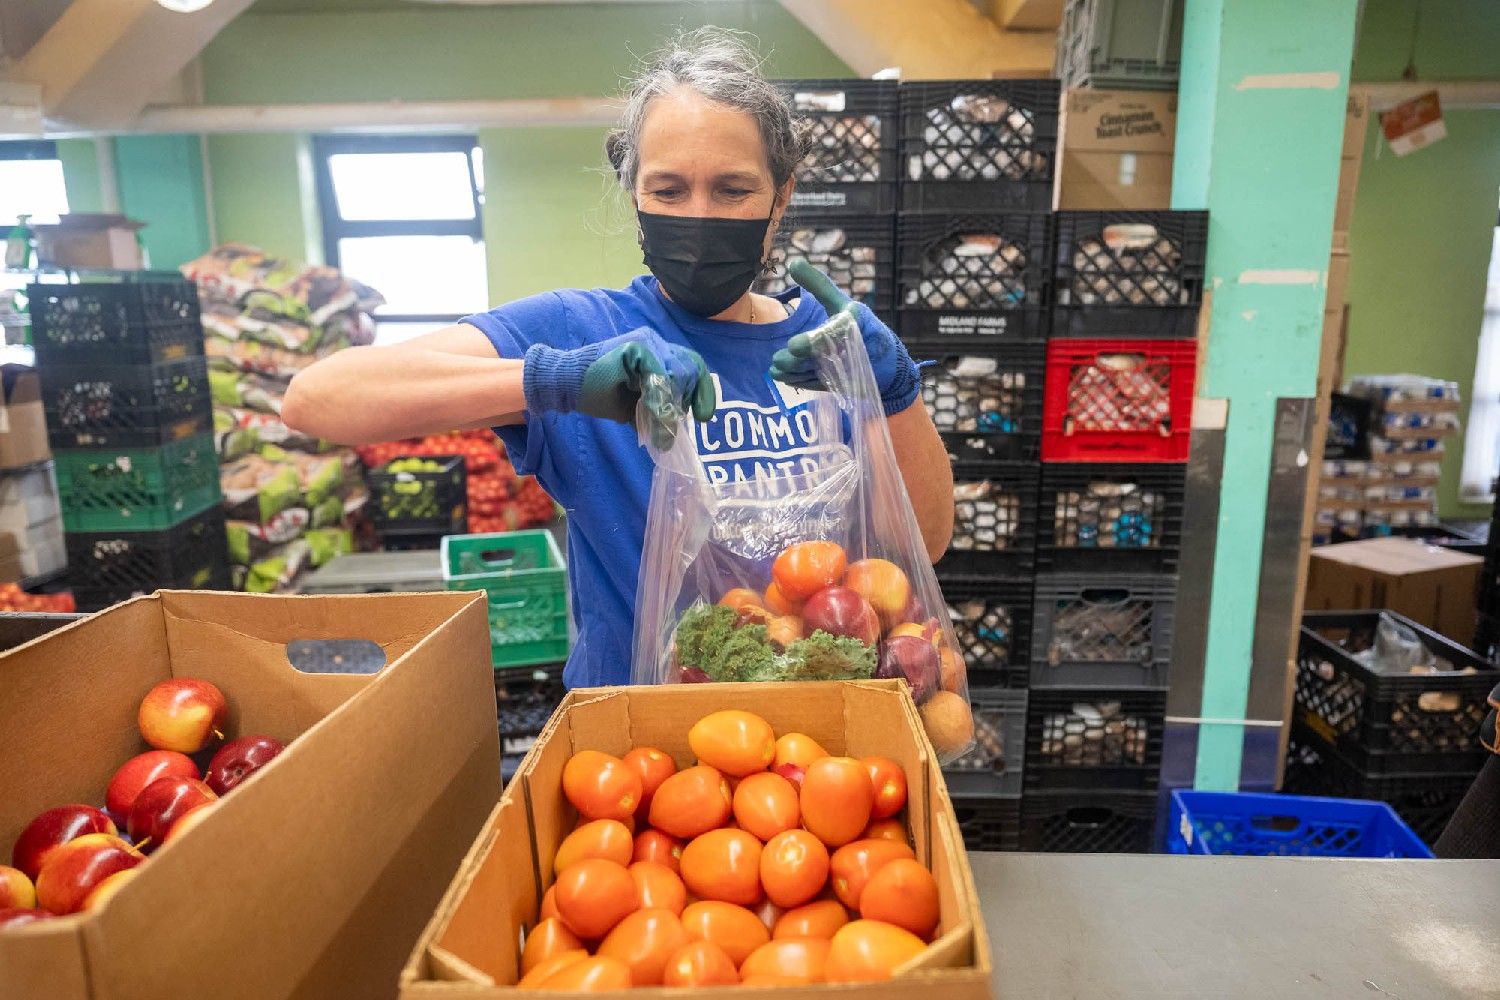 A worker fills a plastic bag with produce.